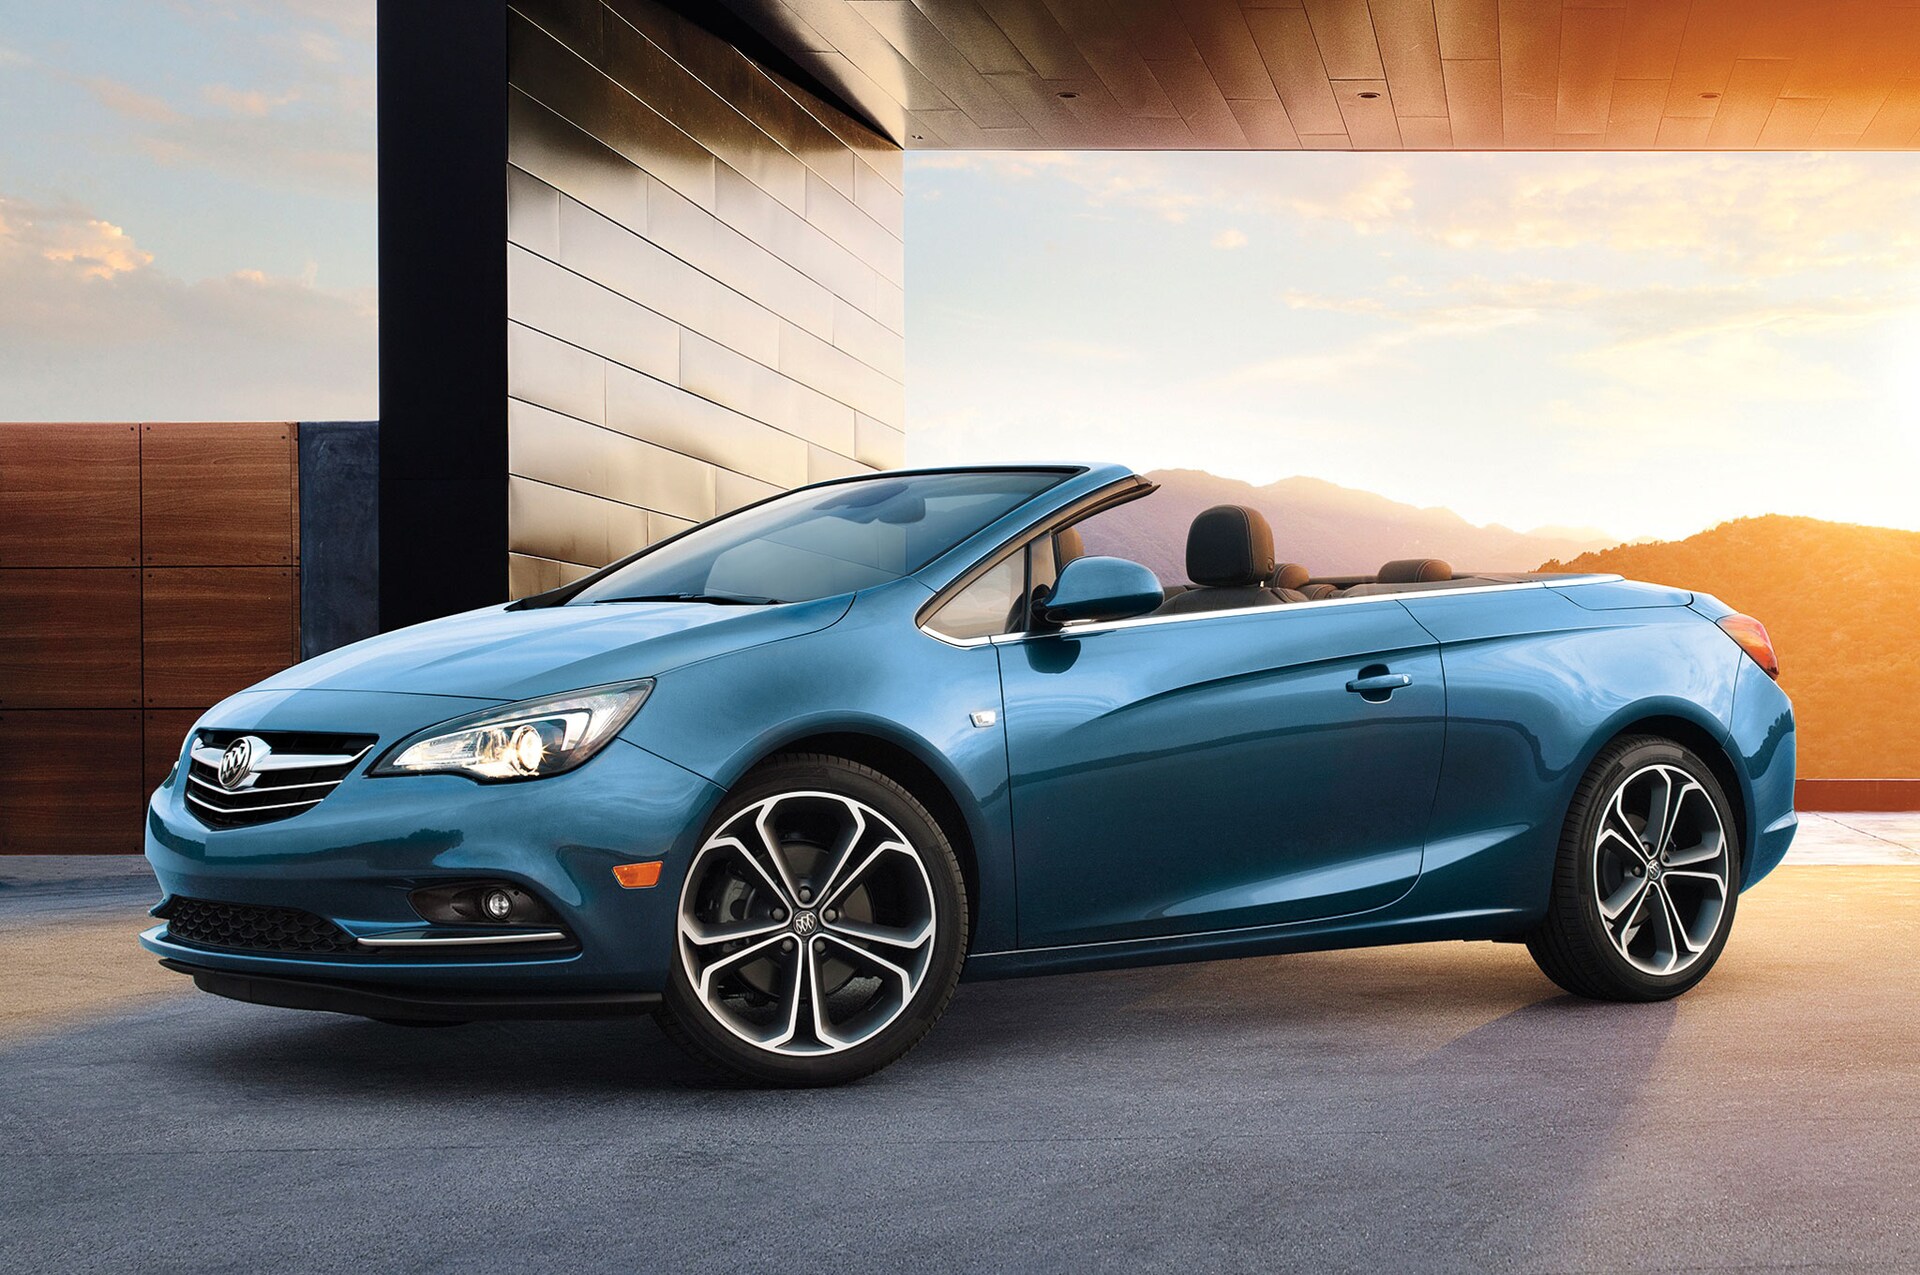 2016 Buick Cascada Convertible Priced Starting at $33,990